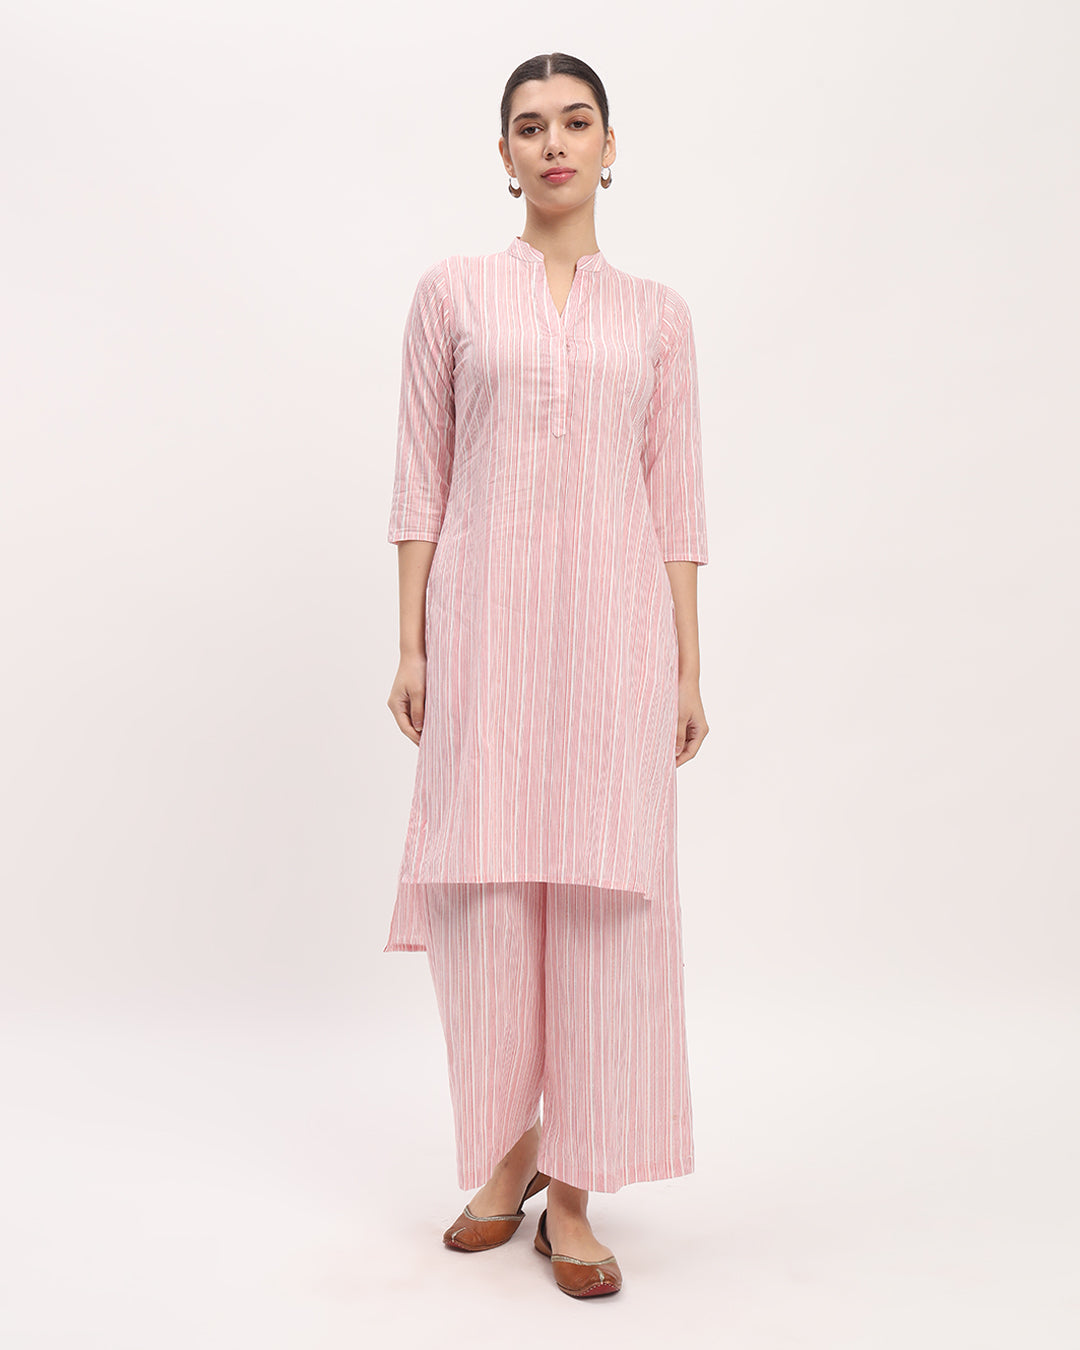 Combo: Blue Starry & Pink Chic Lines High-Low Printed Kurta (Without Bottoms)